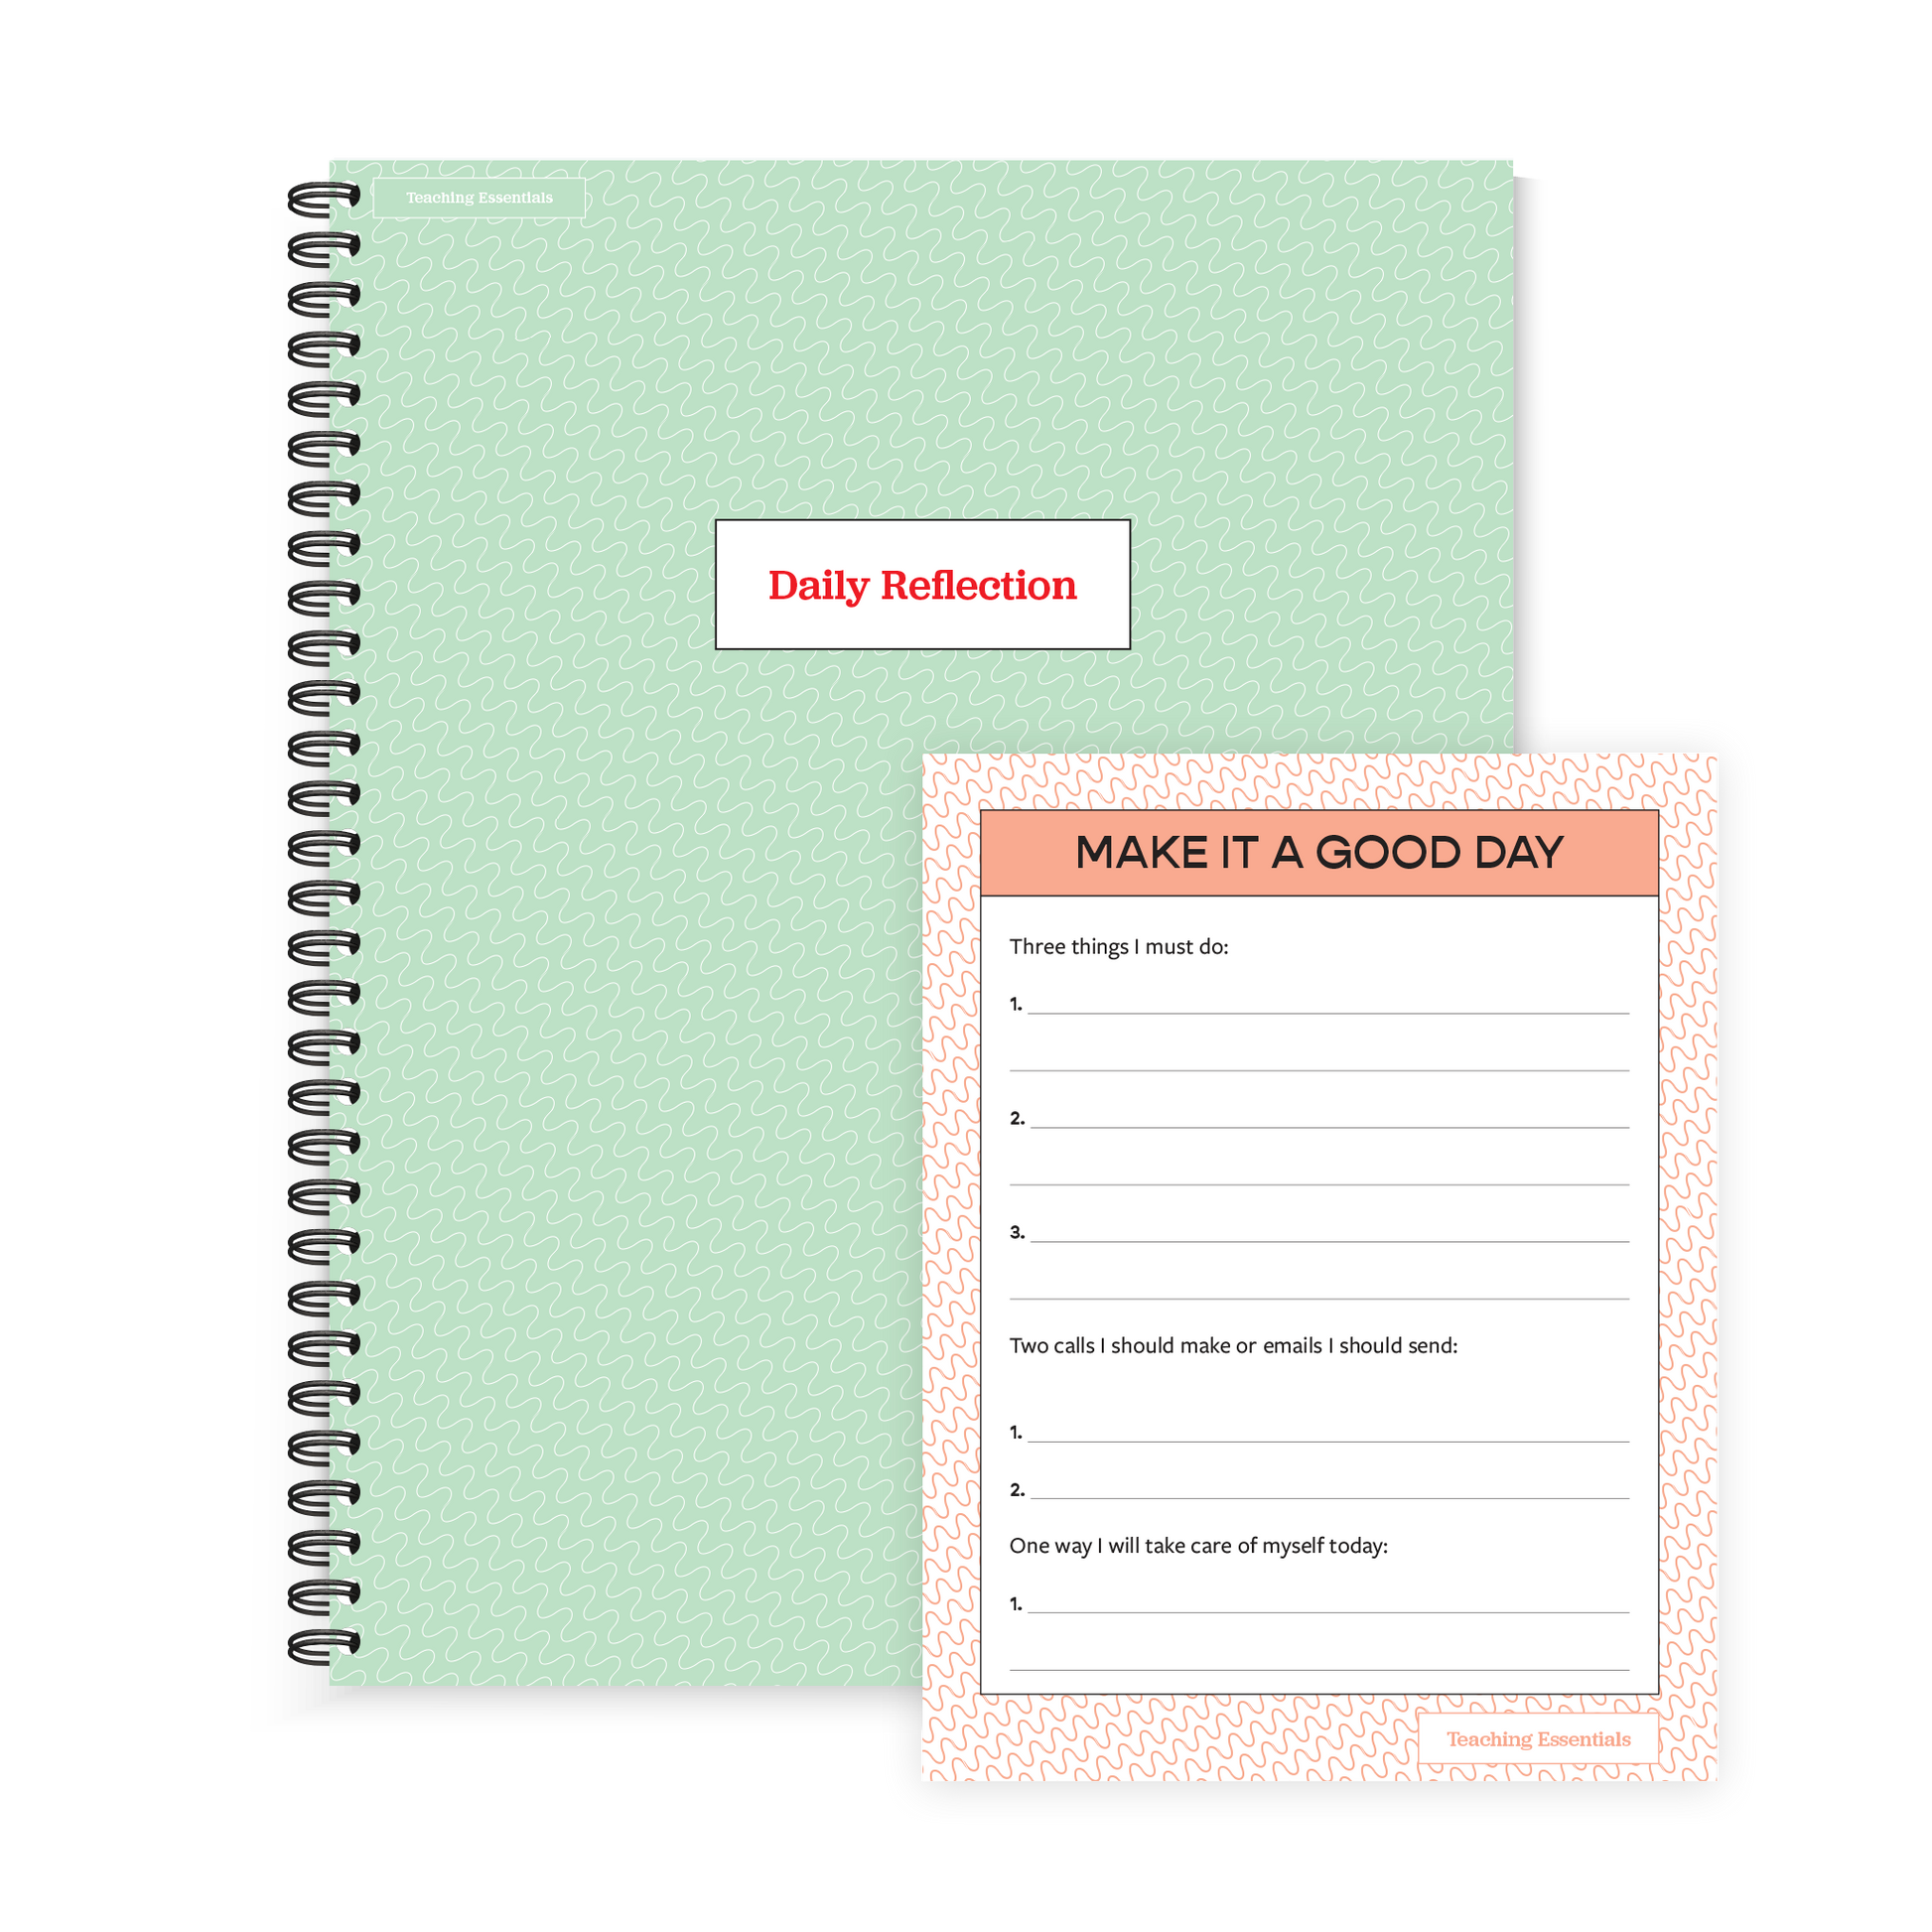 Preview of the green cover of the Daily Reflections book and the Make it a Good Day Notepad in the Region 13 Mindful Educator Bundle - Teaching Essentials (Spiral-Bound and Notepad).